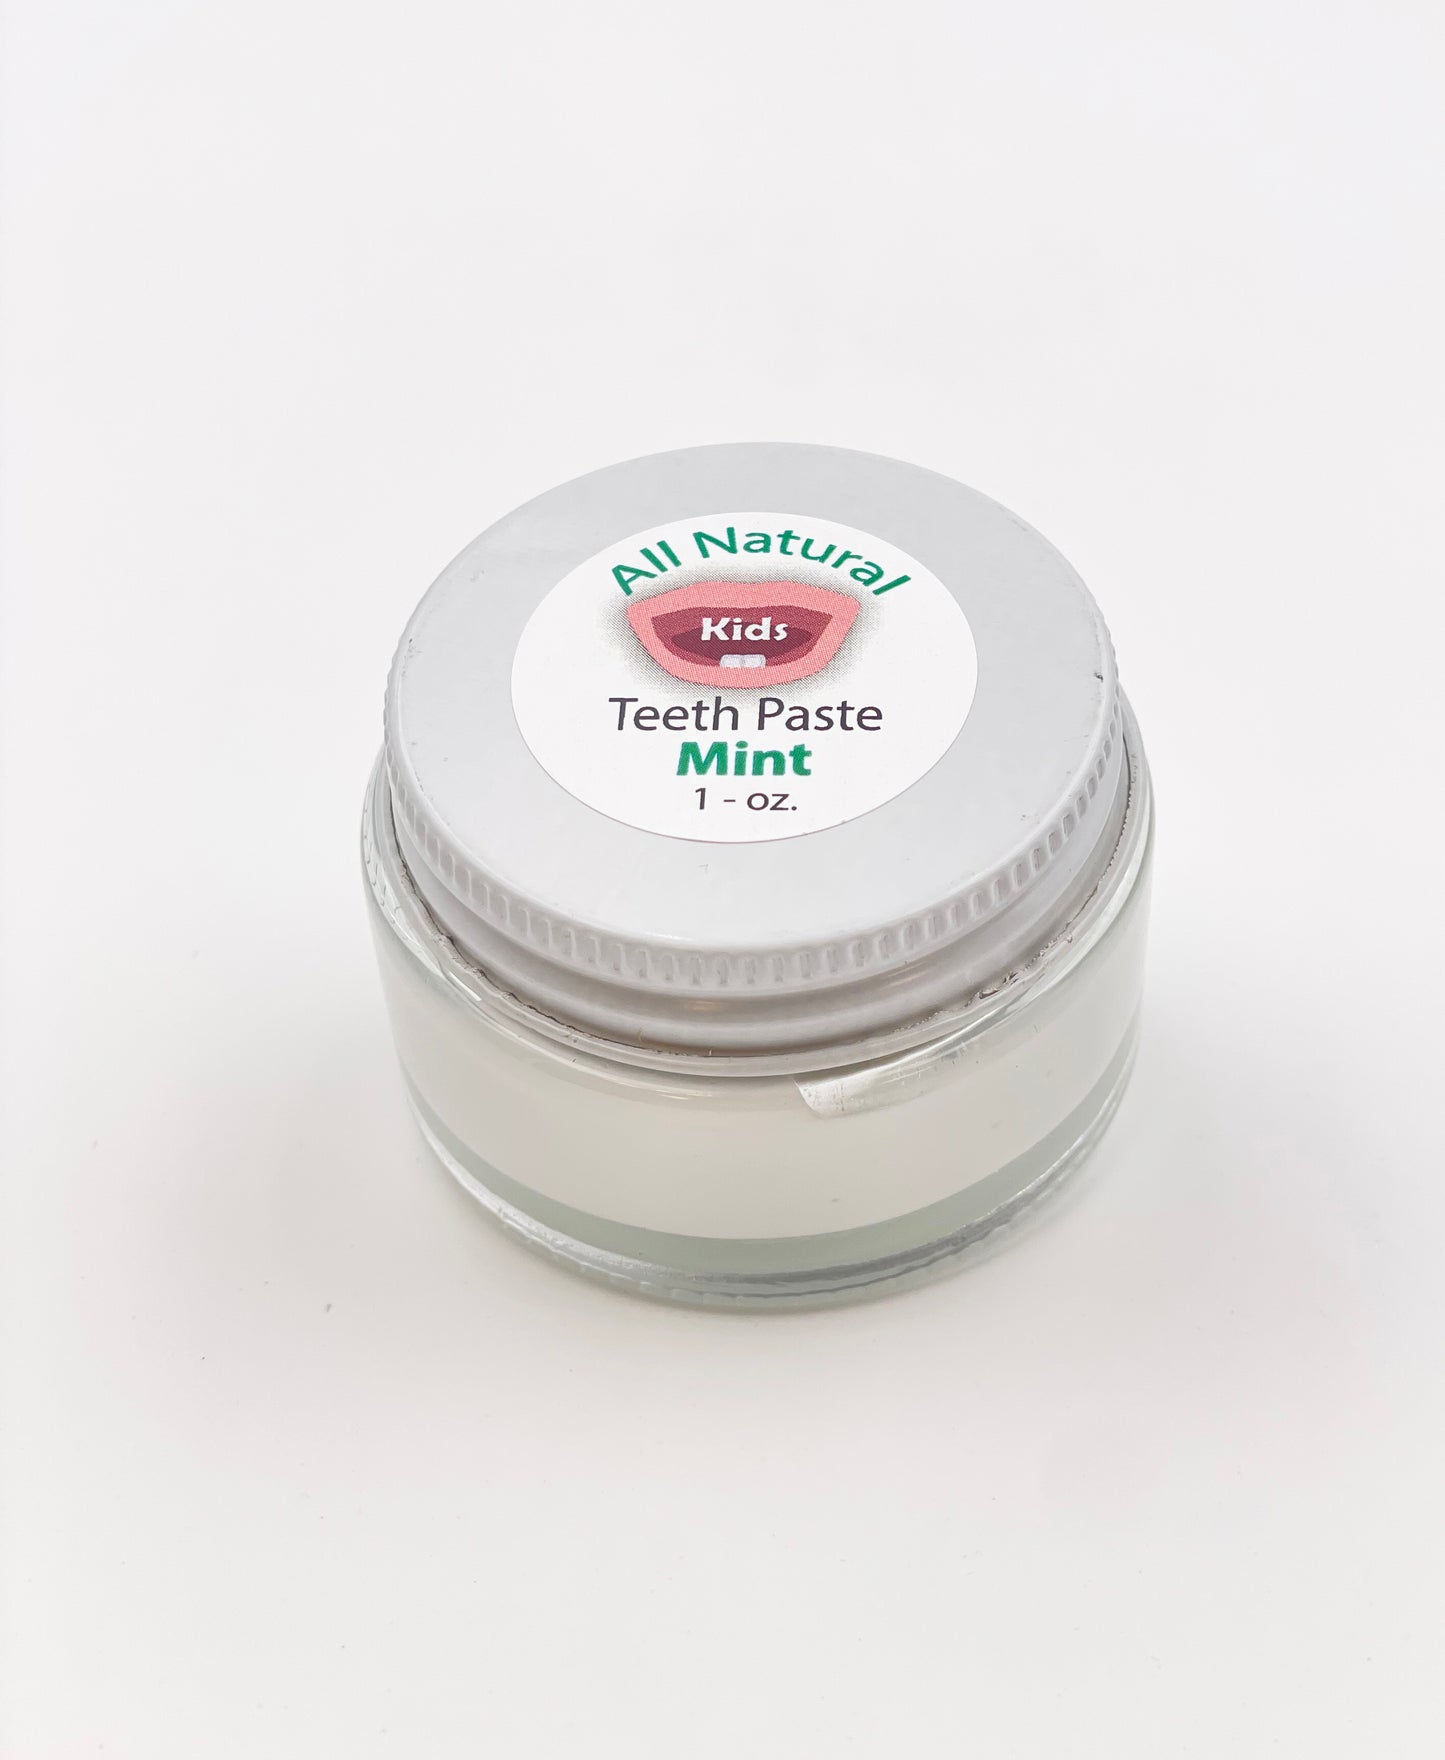 BALM! Baby - Teeth Paste Natural Kids Toothpaste w/ xylitol - SAMPLE SIZE